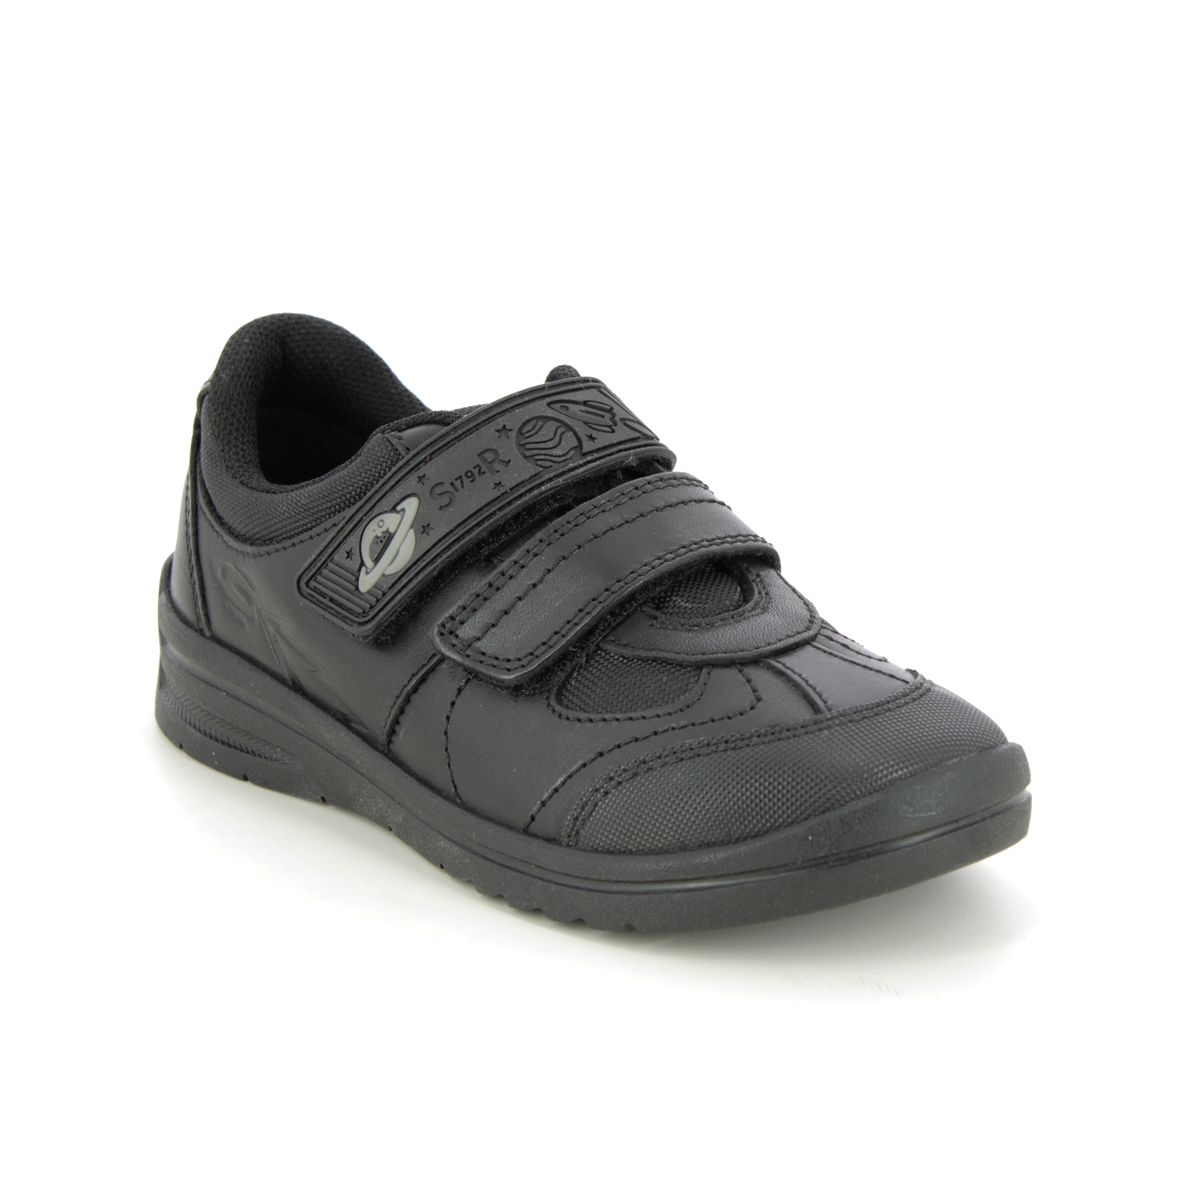 Start Rite Rocket 2v Black leather Kids Boys Shoes 2797-75E in a Plain Leather in Size 3.5